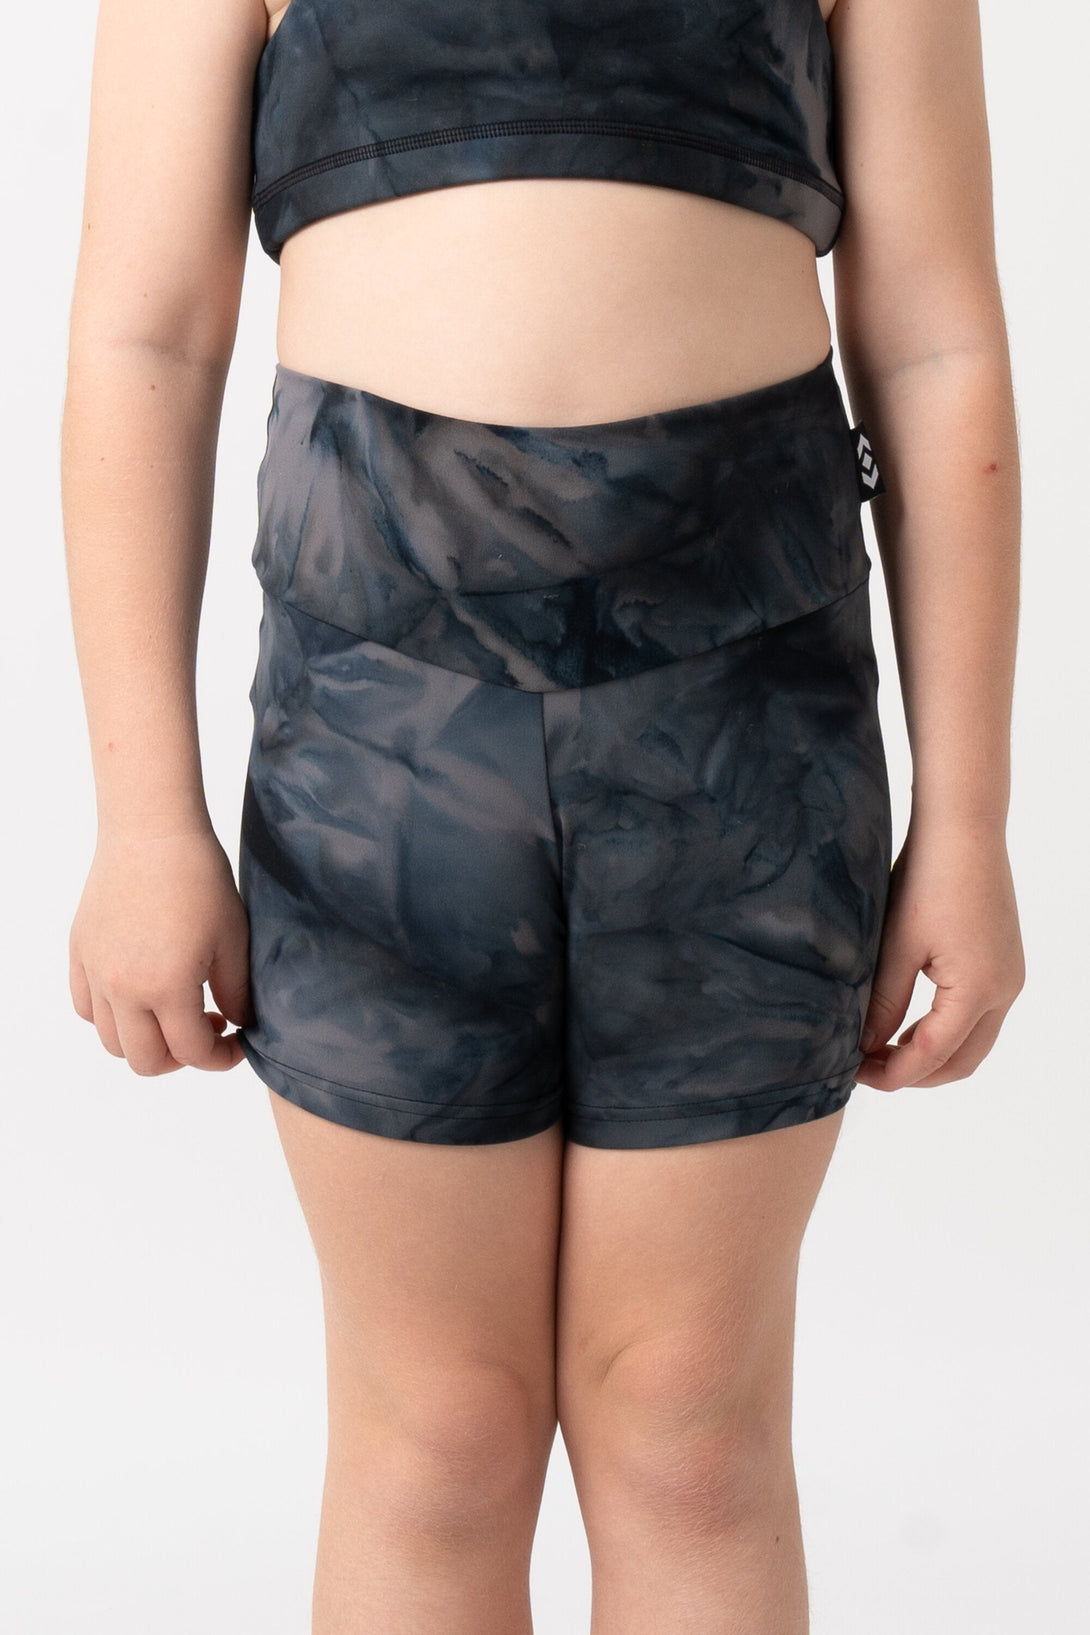 Dark and Moody Tie Dye Body Contouring - Kids Booty Shorts-Activewear-Exoticathletica